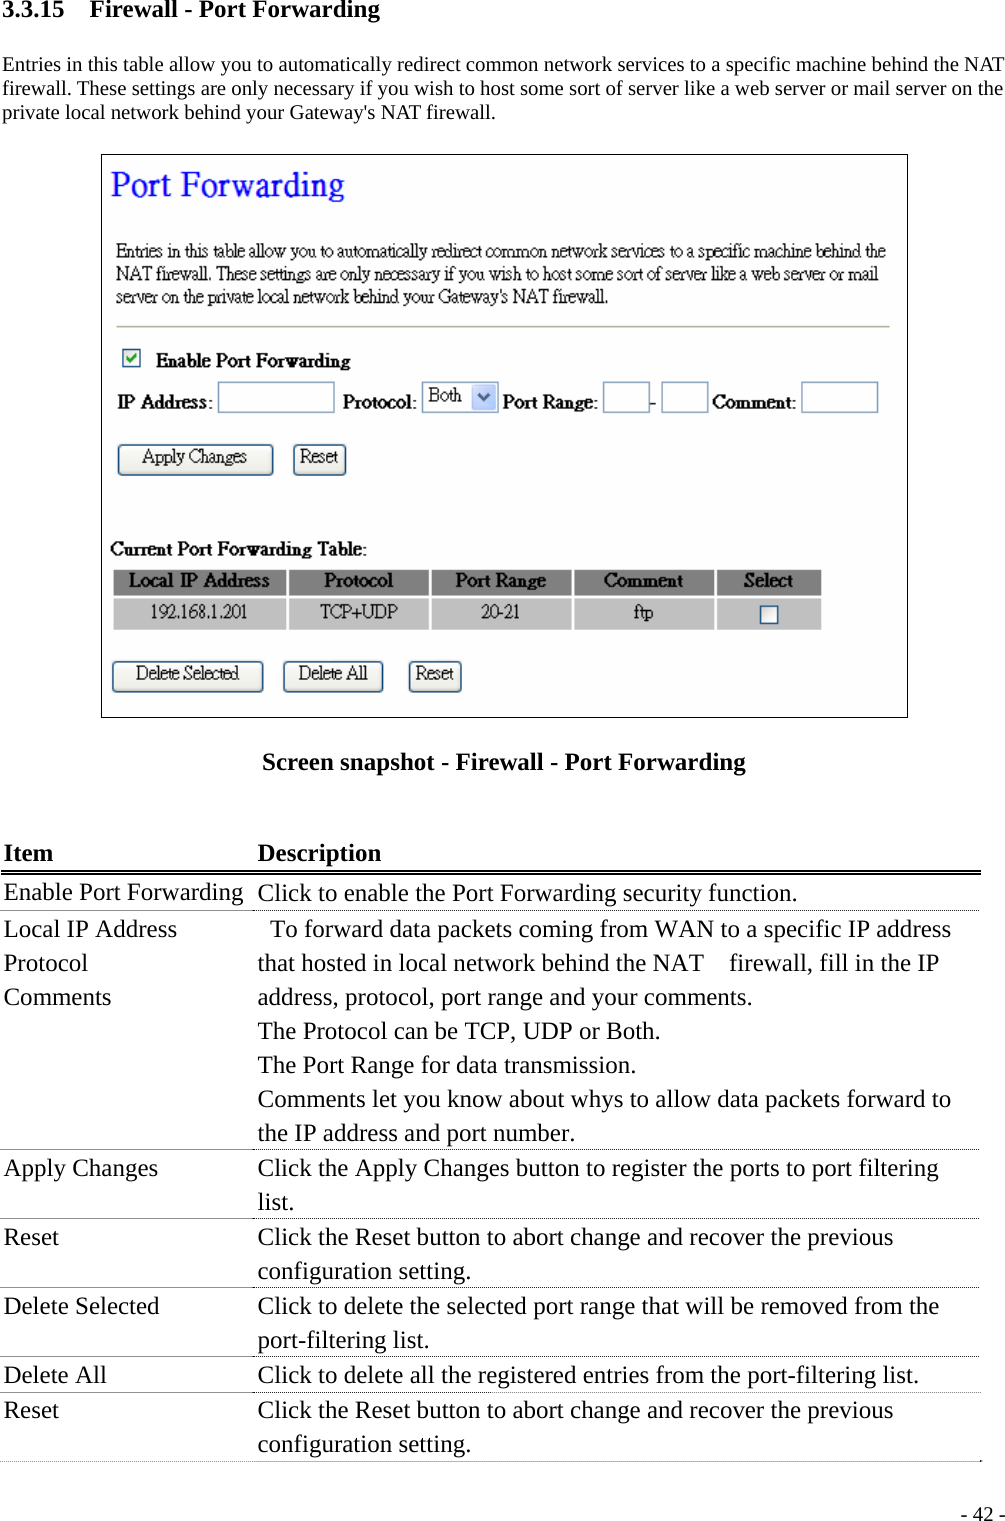 3.3.15    Firewall - Port Forwarding Entries in this table allow you to automatically redirect common network services to a specific machine behind the NAT firewall. These settings are only necessary if you wish to host some sort of server like a web server or mail server on the private local network behind your Gateway&apos;s NAT firewall.  Screen snapshot - Firewall - Port Forwarding  Item Description Enable Port Forwarding  Click to enable the Port Forwarding security function. Local IP Address Protocol  Comments     To forward data packets coming from WAN to a specific IP address that hosted in local network behind the NAT    firewall, fill in the IP address, protocol, port range and your comments. The Protocol can be TCP, UDP or Both. The Port Range for data transmission. Comments let you know about whys to allow data packets forward to the IP address and port number. Apply Changes  Click the Apply Changes button to register the ports to port filtering list. Reset  Click the Reset button to abort change and recover the previous configuration setting. Delete Selected  Click to delete the selected port range that will be removed from the port-filtering list. Delete All  Click to delete all the registered entries from the port-filtering list. Reset  Click the Reset button to abort change and recover the previous configuration setting.  - 42 -